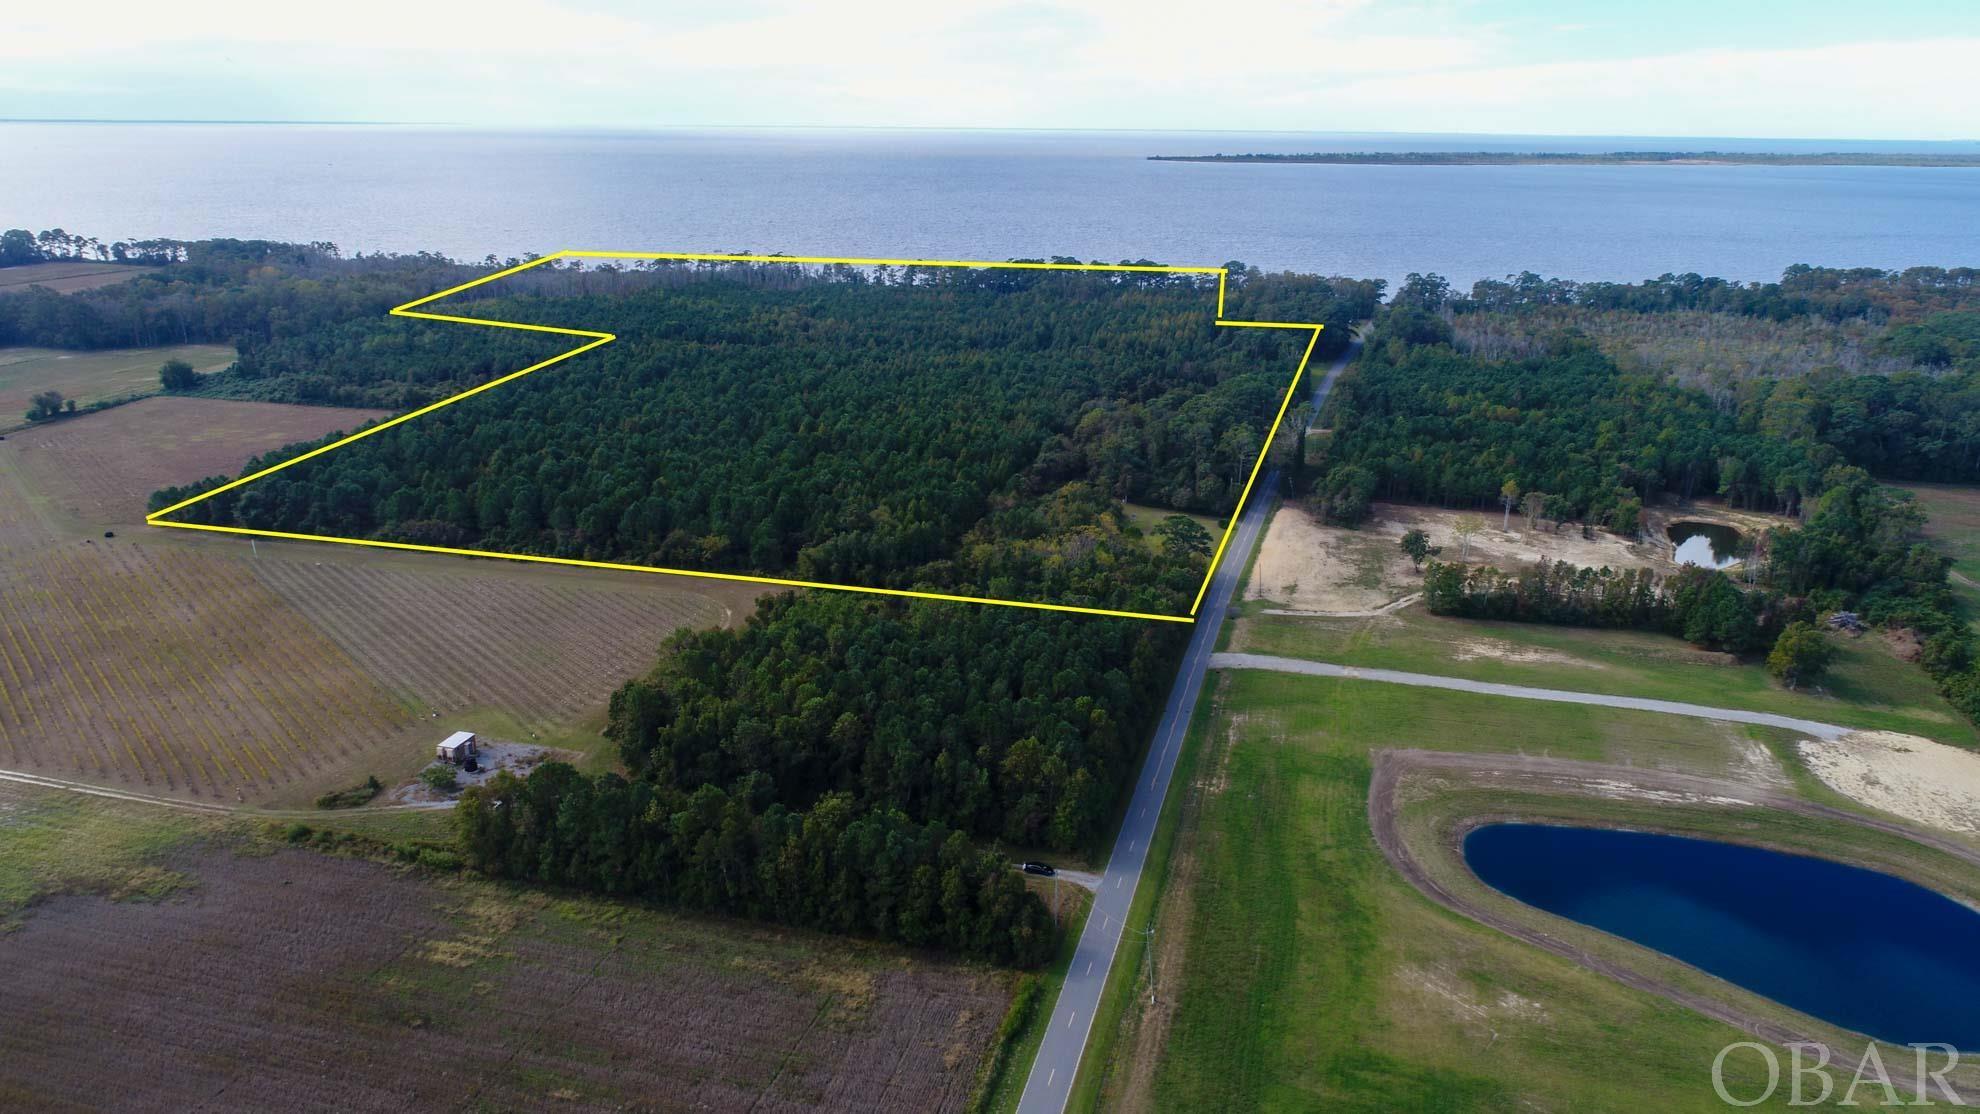 SOUNDFRONT ACREAGE. The family has decided to sell. This unique tract is now available. 57 acres of rolling woodlands on the Albemarle Sound. 1400 feet of sound frontage and 400 feet of frontage on Fisher Landing Road. Enjoy multiple nearby golf courses, fishing, hunting, or a special wine grown on adjoining vineyards. With easy access to the Outer Banks Beaches plus Hampton Roads and Elizabeth City. Ideally suited for development or the discerning buyer looking to create a family compound with a few secluded homes scattered over the wooded acreage. Contact agents for more details and information.